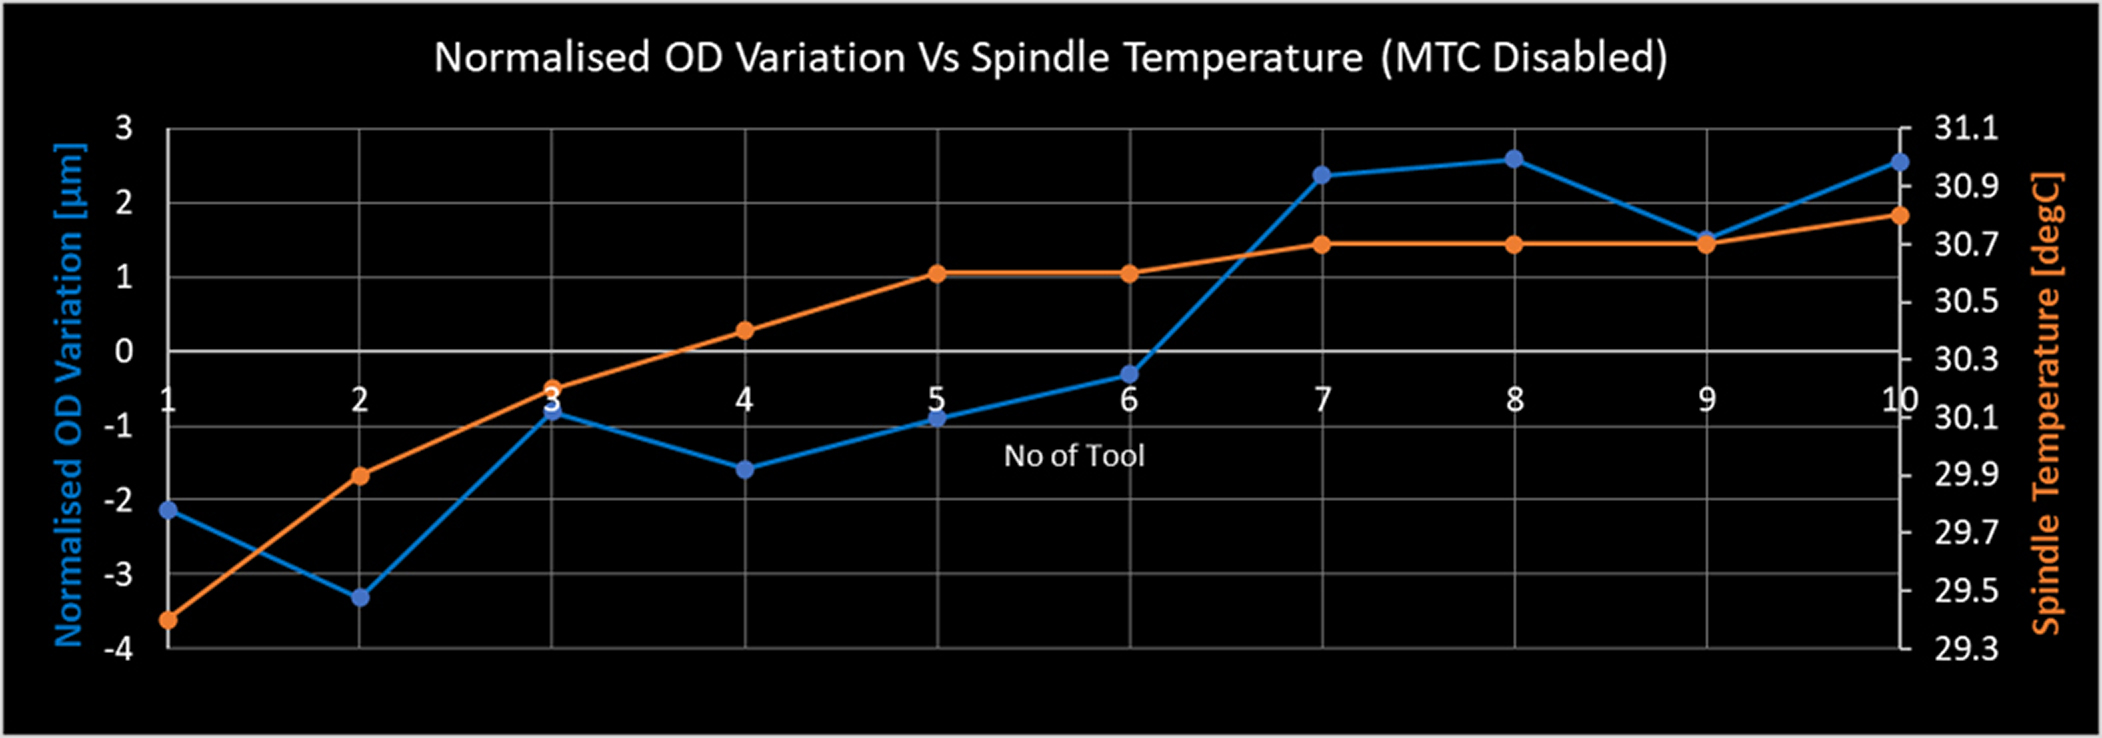 2-Normalized-OD-Variation-vs-Spindle-Temperature-(MTC-Disabled).jpg